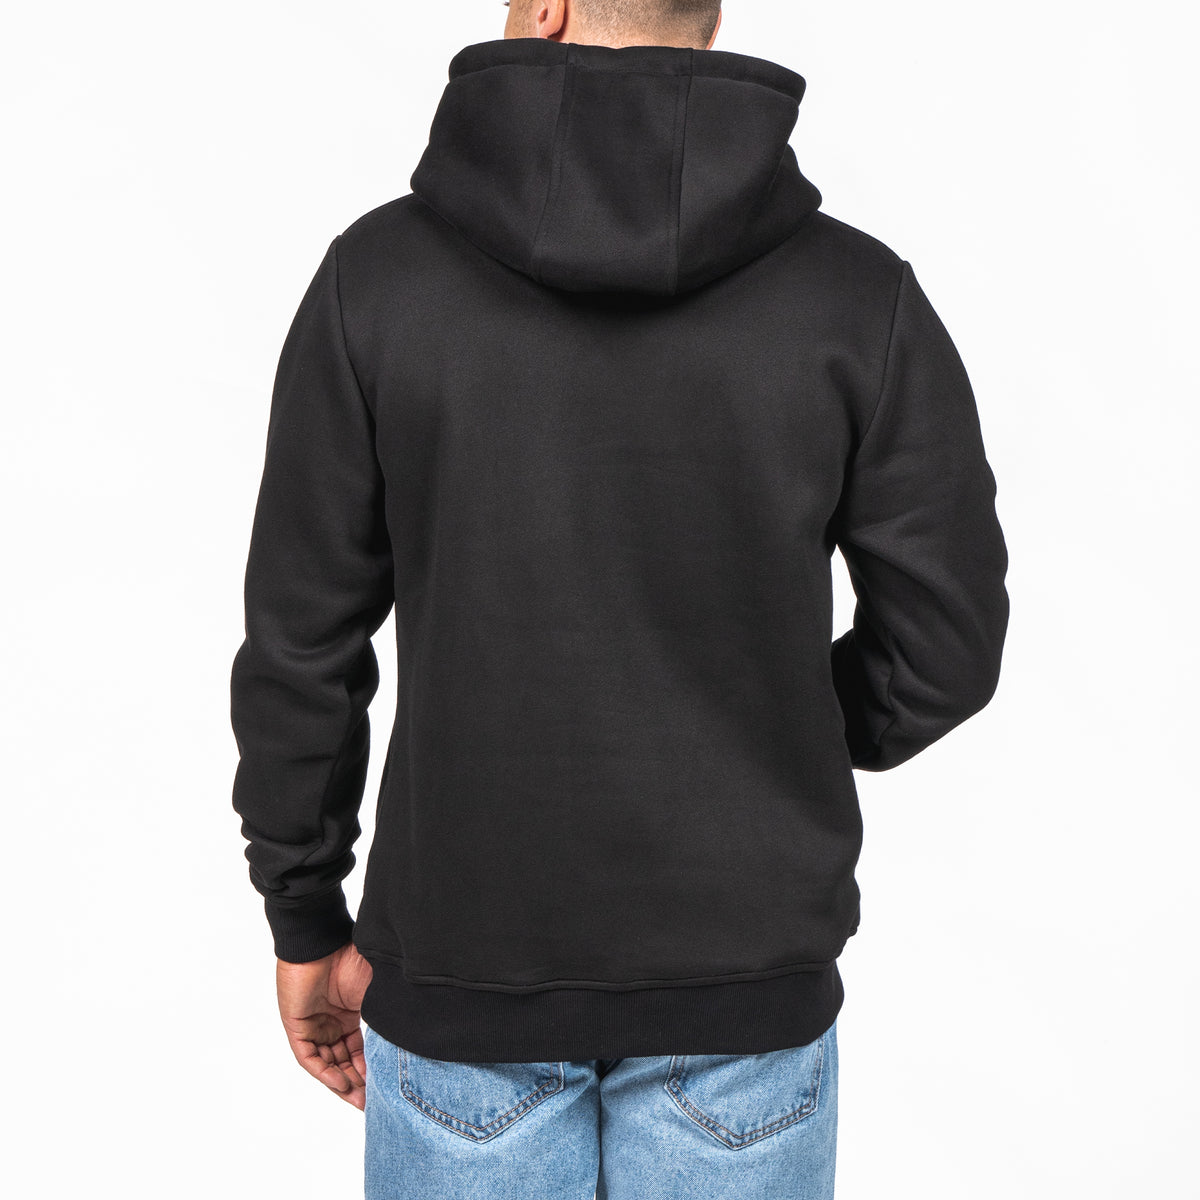 Desolve Supply Co | Outrigger Hoodie - Desolve Supply Co. | NZ